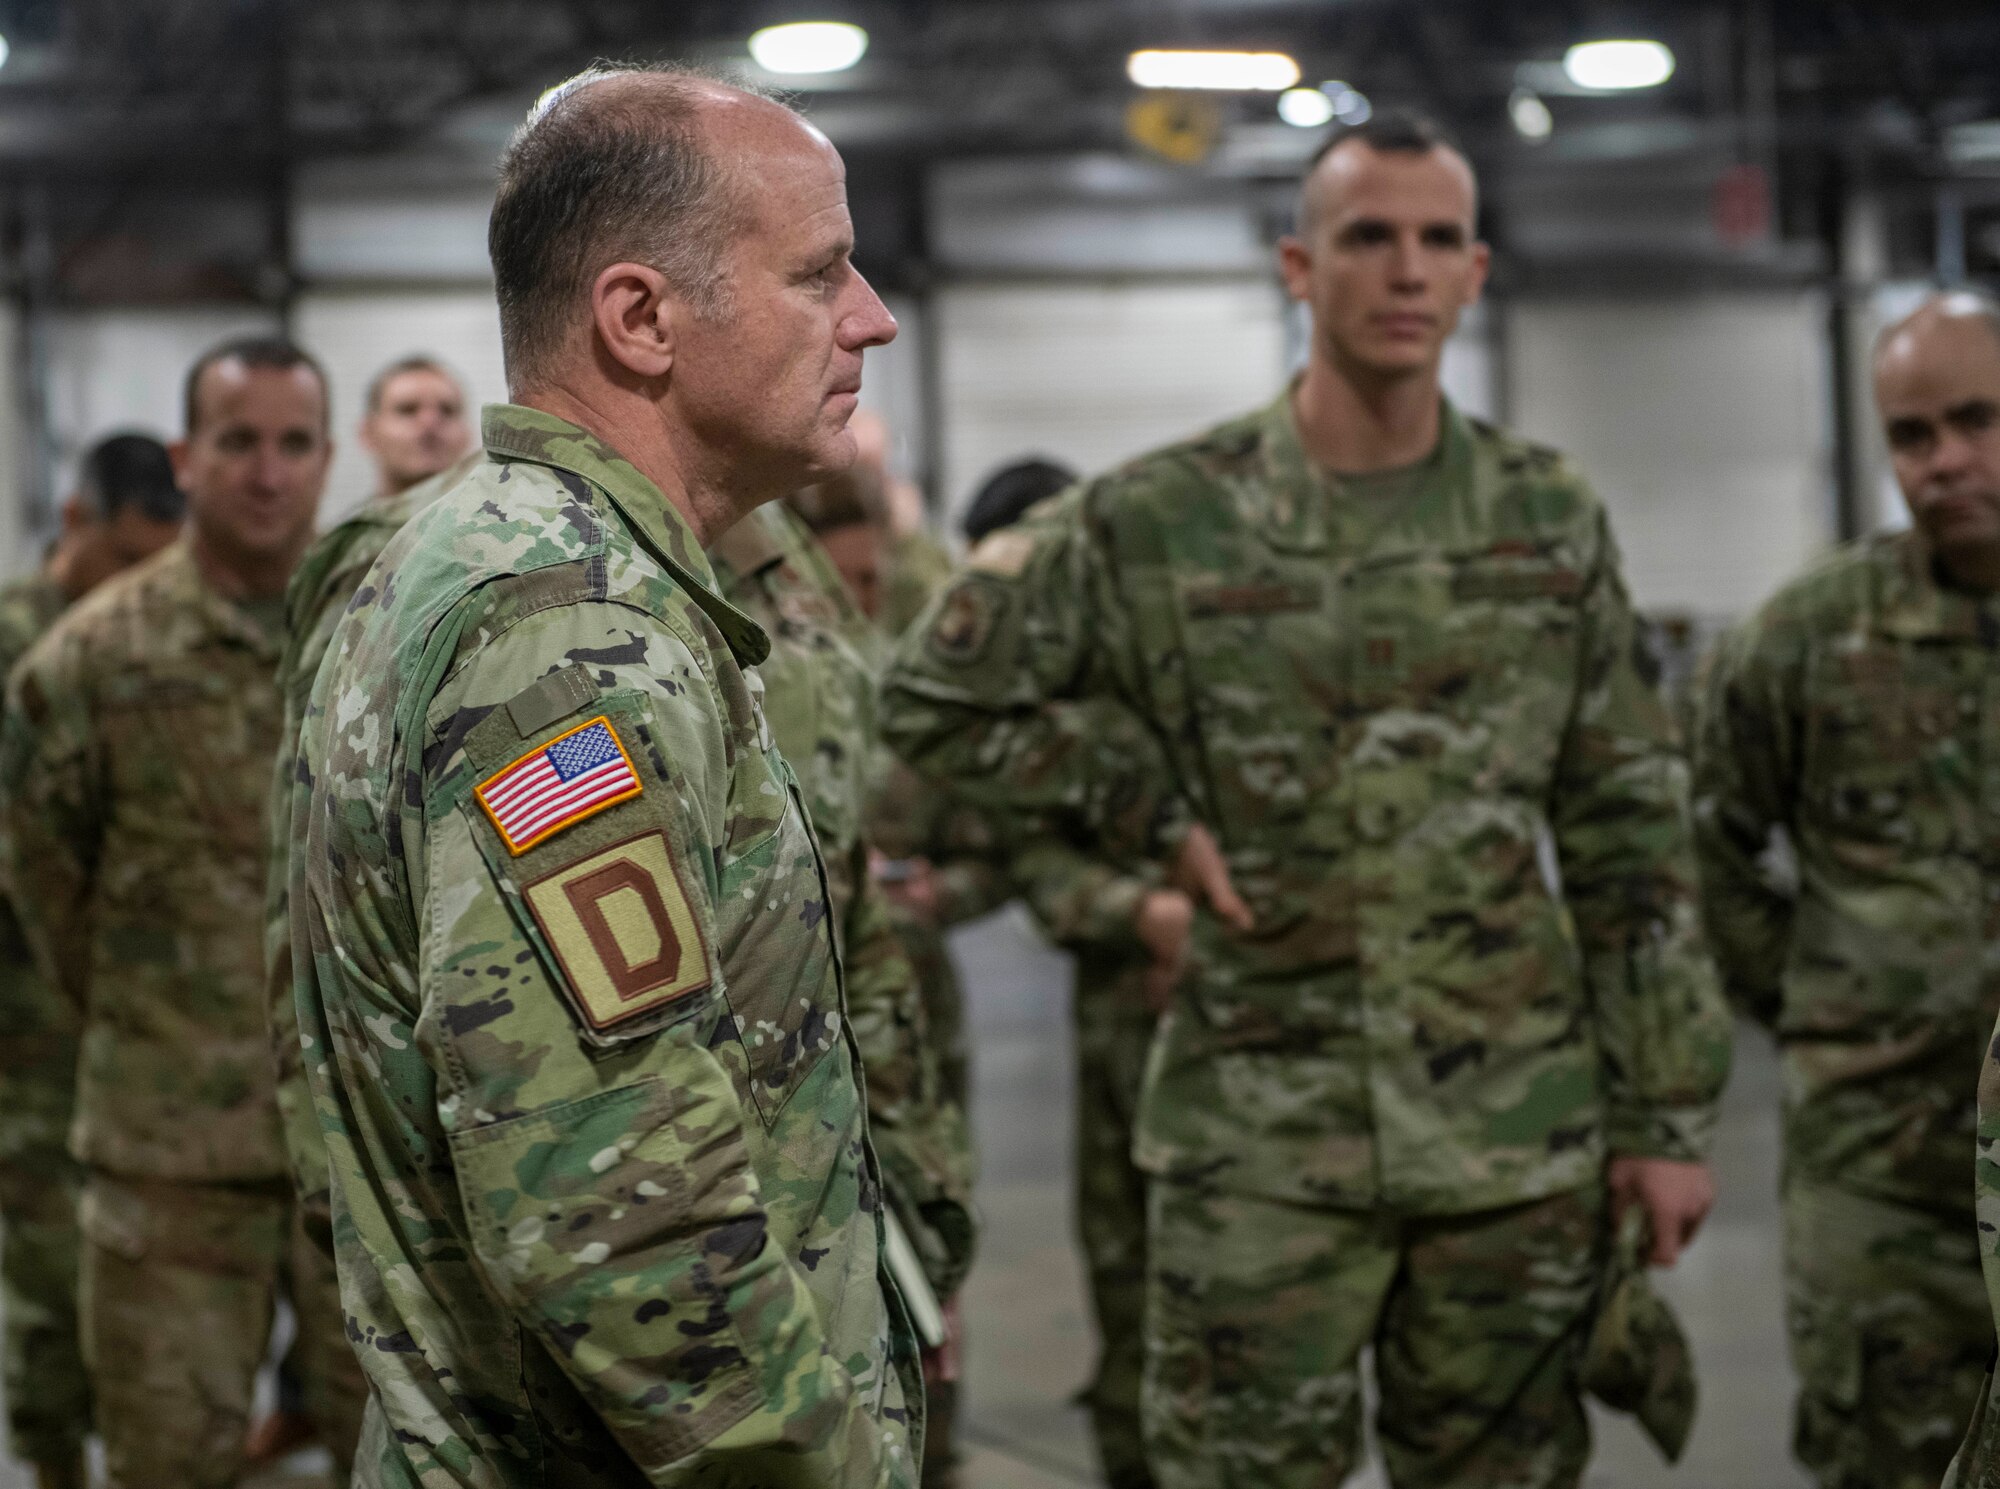 U.S. Army Gen. Stephen Lyons, U.S. Transportation Command commander, speaks with Airmen from the 727th Air Mobility Squadron during his visit at RAF Mildenhall, England, Nov. 19, 2019. The 727th AMS supported 574 USTRANSCOM transient aircraft during Fiscal Year 2019. (U.S. Air Force photo by Senior Airman Luke Milano)